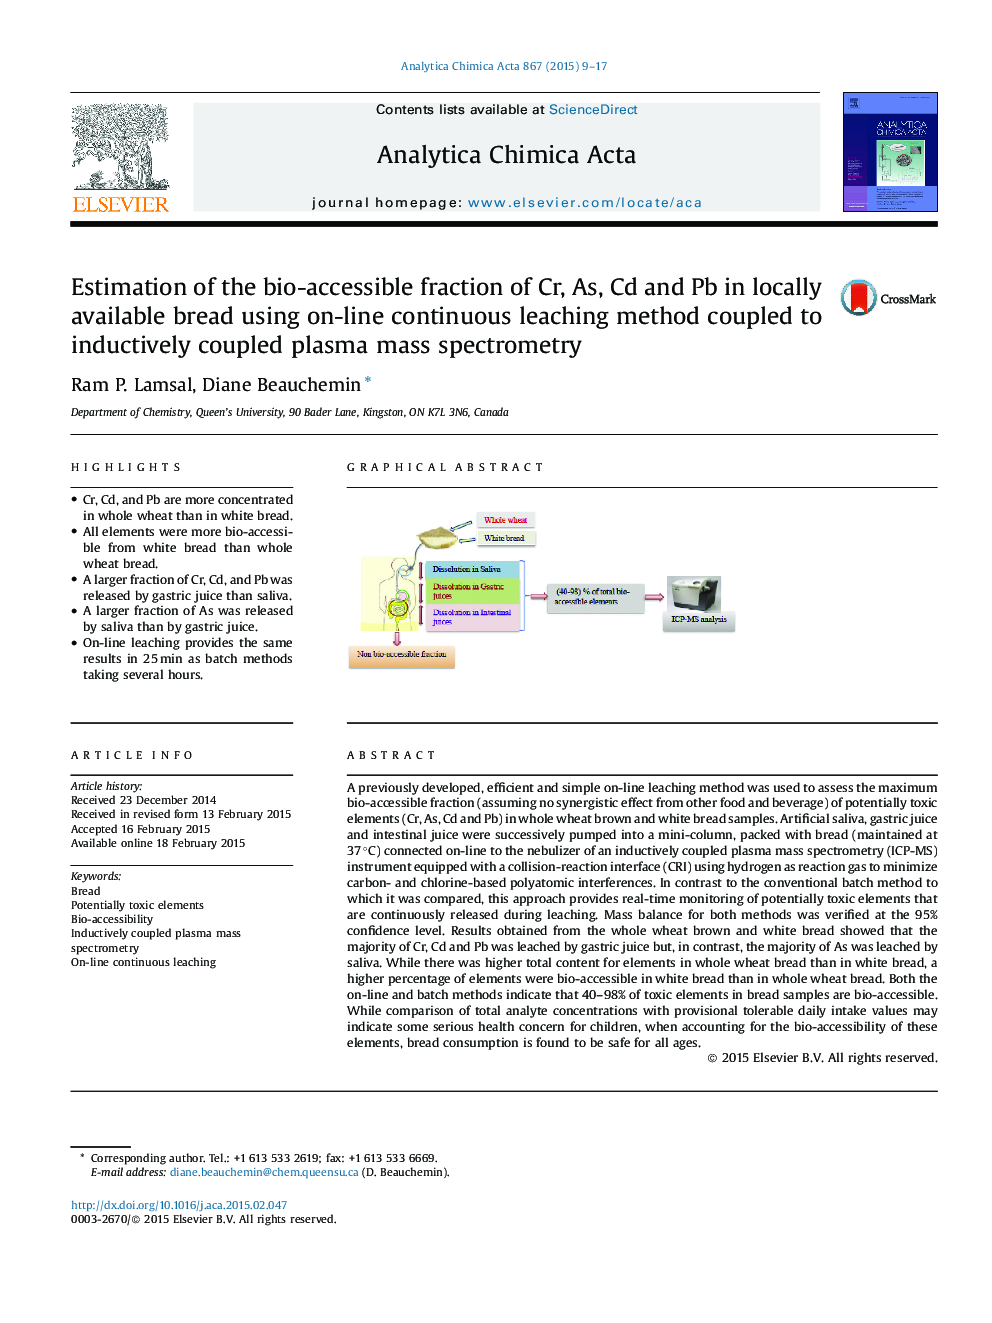 Estimation of the bio-accessible fraction of Cr, As, Cd and Pb in locally available bread using on-line continuous leaching method coupled to inductively coupled plasma mass spectrometry